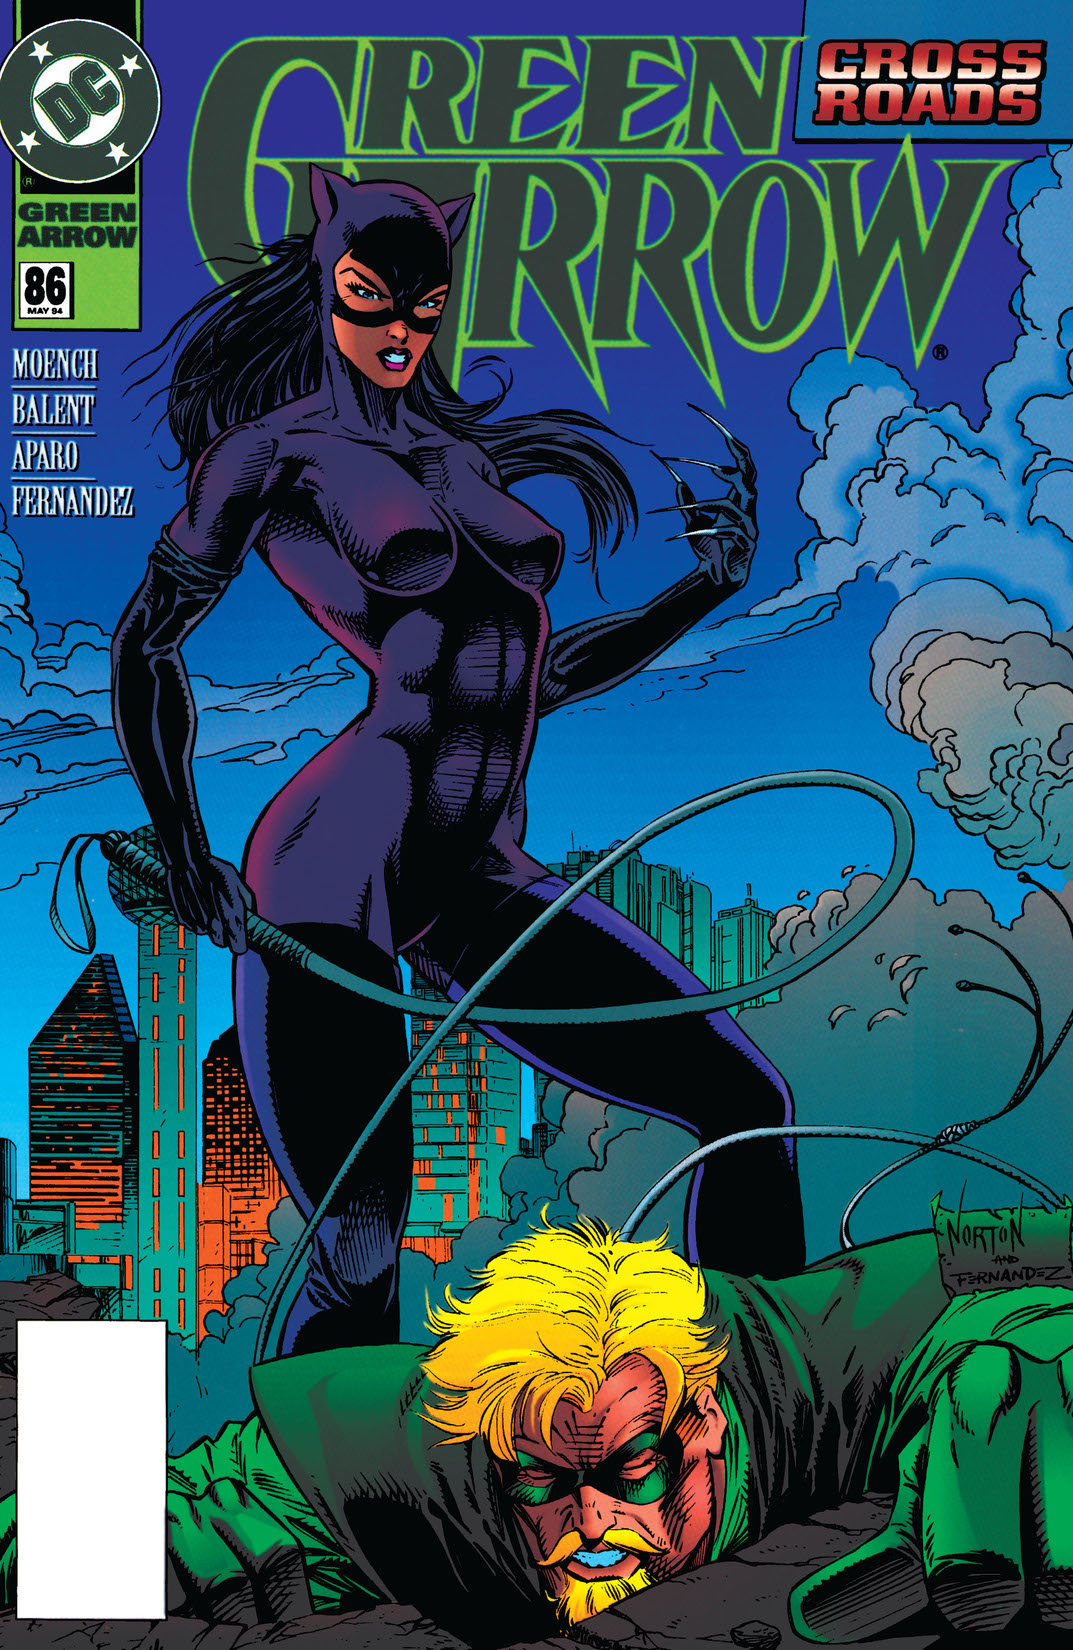 Green Arrow (1987-1998) #86 preview images